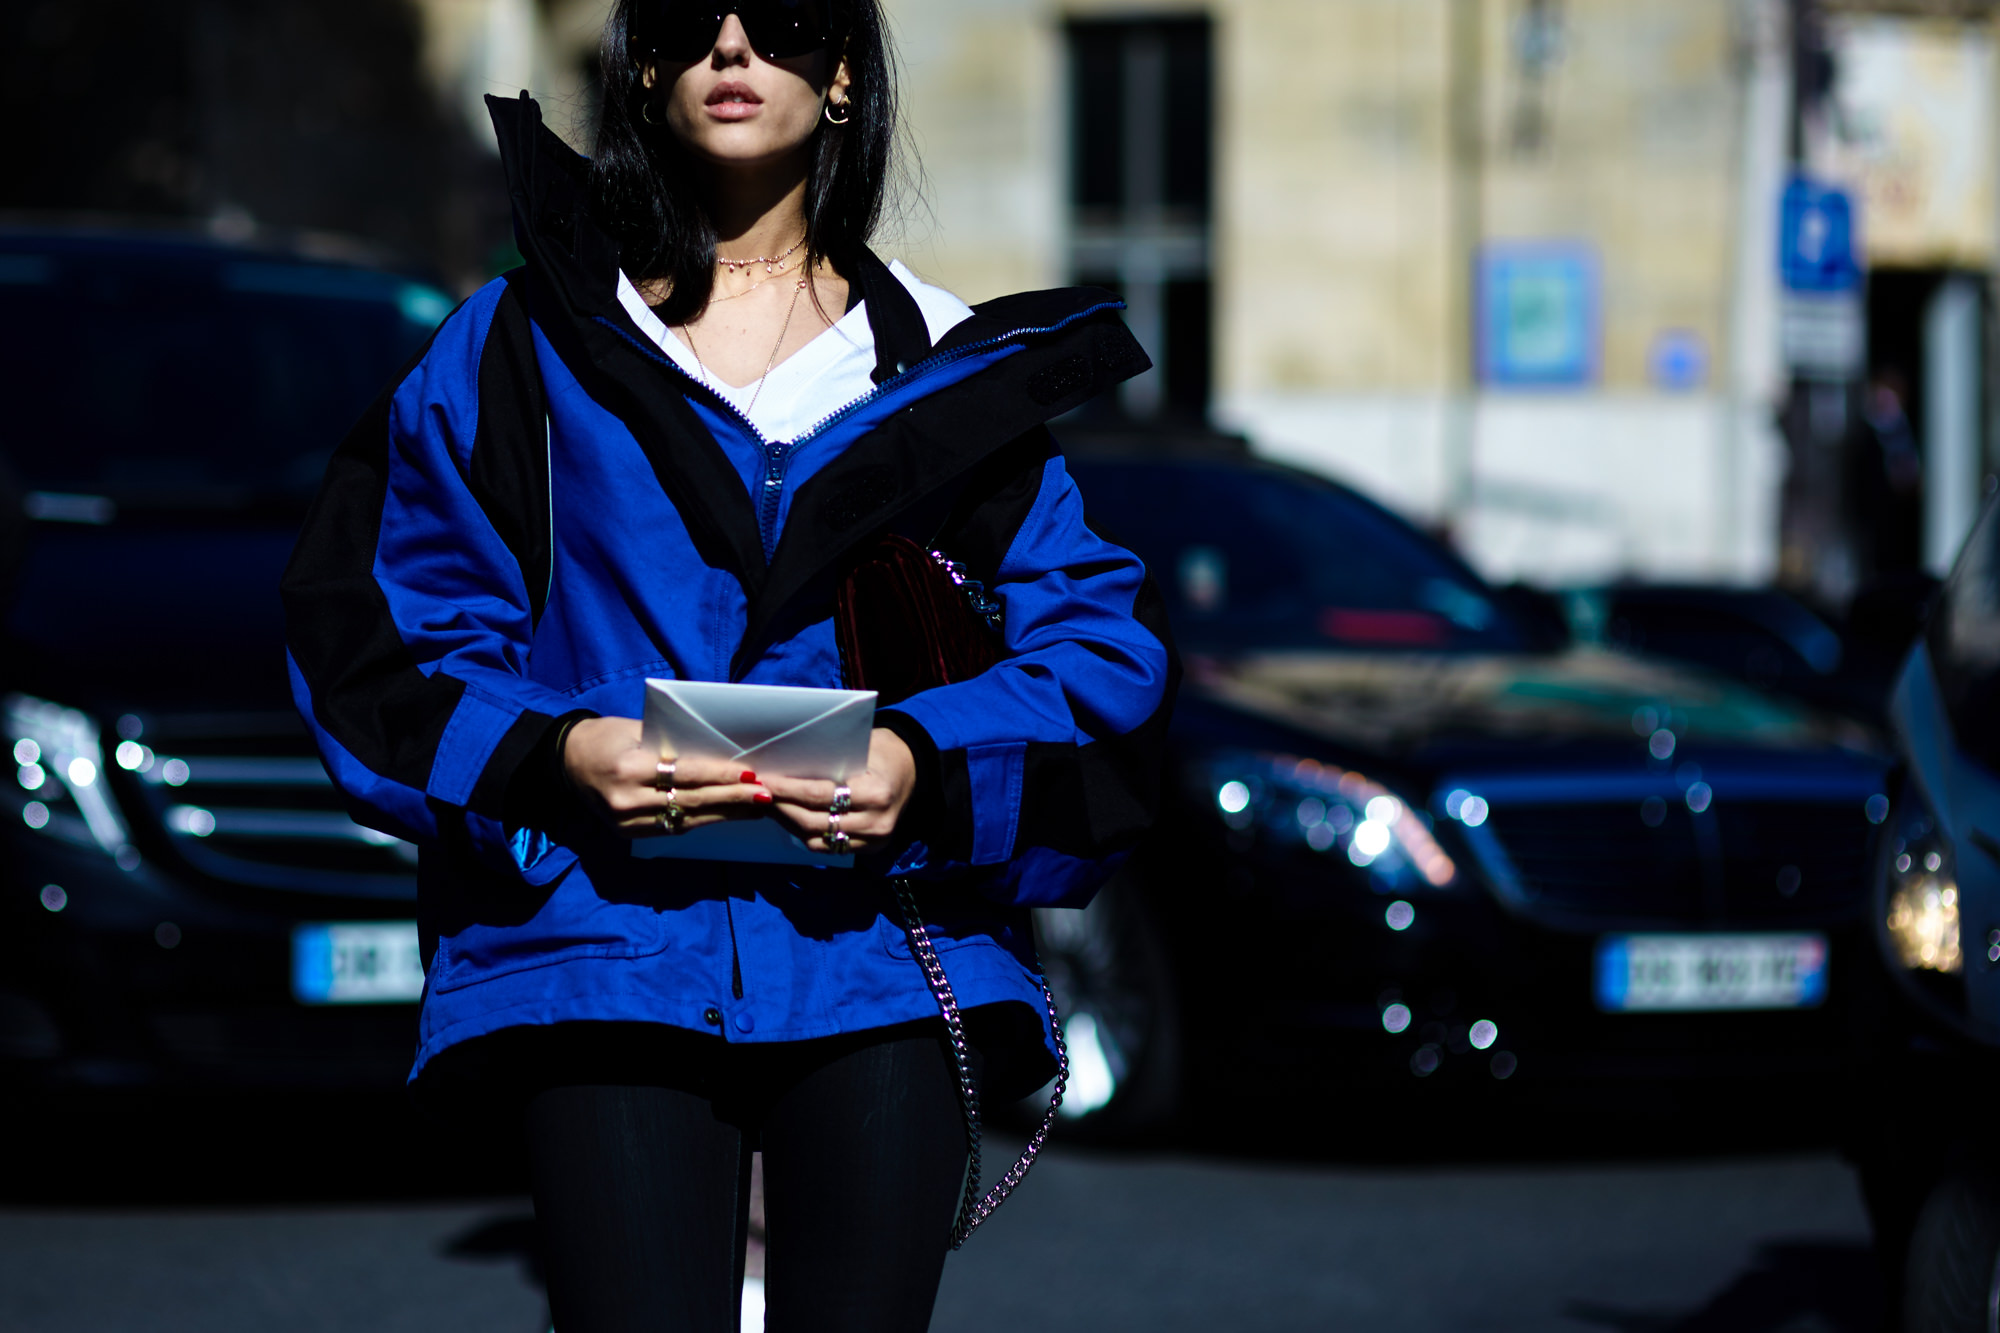 PFW Spring-Summer 2017 Street Style:Gilda Ambrosio wearing a blue oversized Balenciaga jacket and black jeans before the Miu Miu SS17 fashion show in Paris